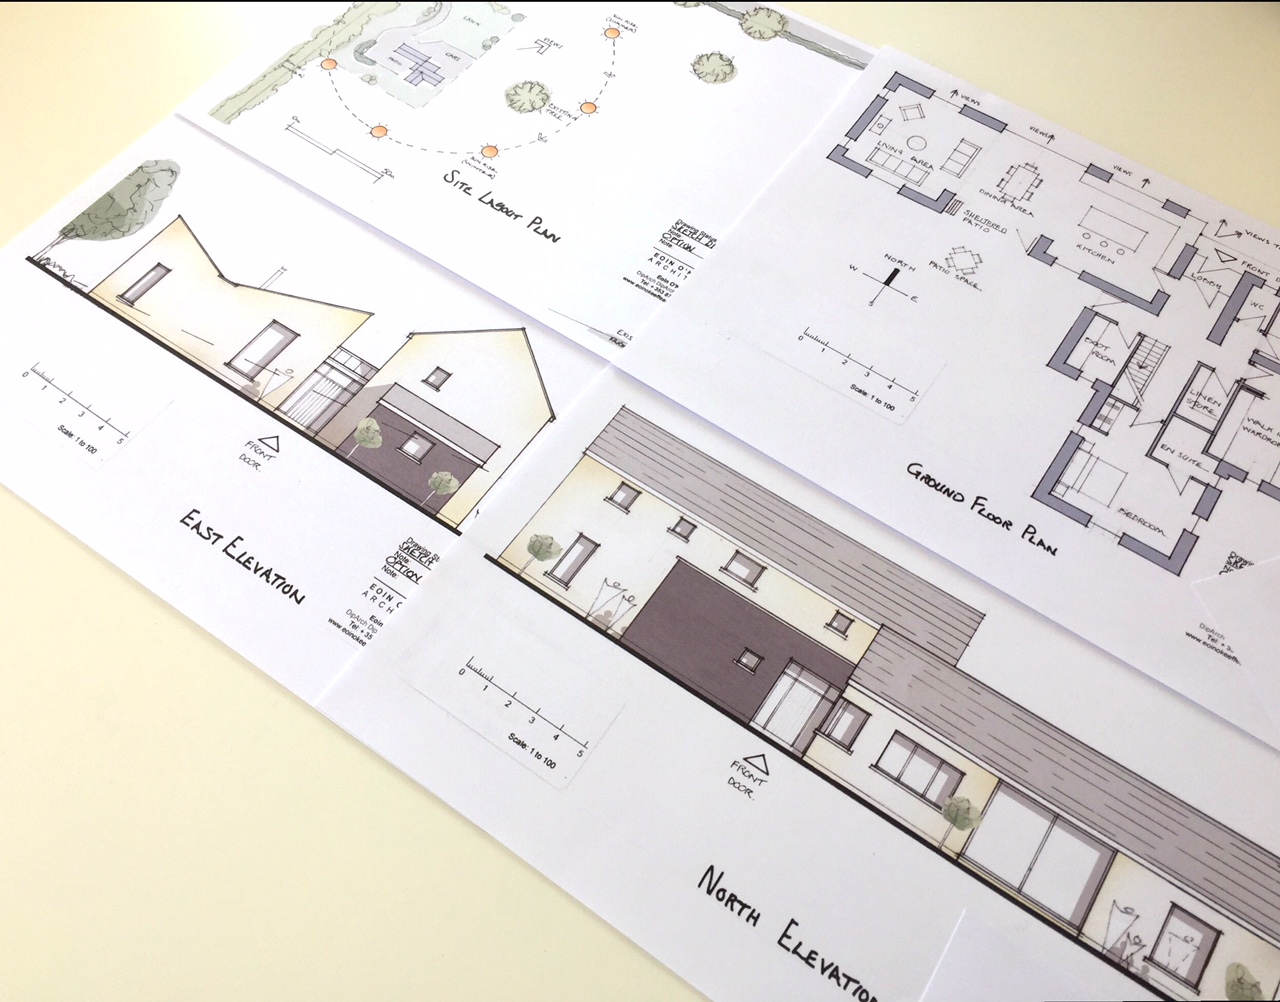 New Dwelling House, Sketch Design, Hand Drawing, Plan, Site Plan, Elevations, Options. Eoin O'Keefe Architects.